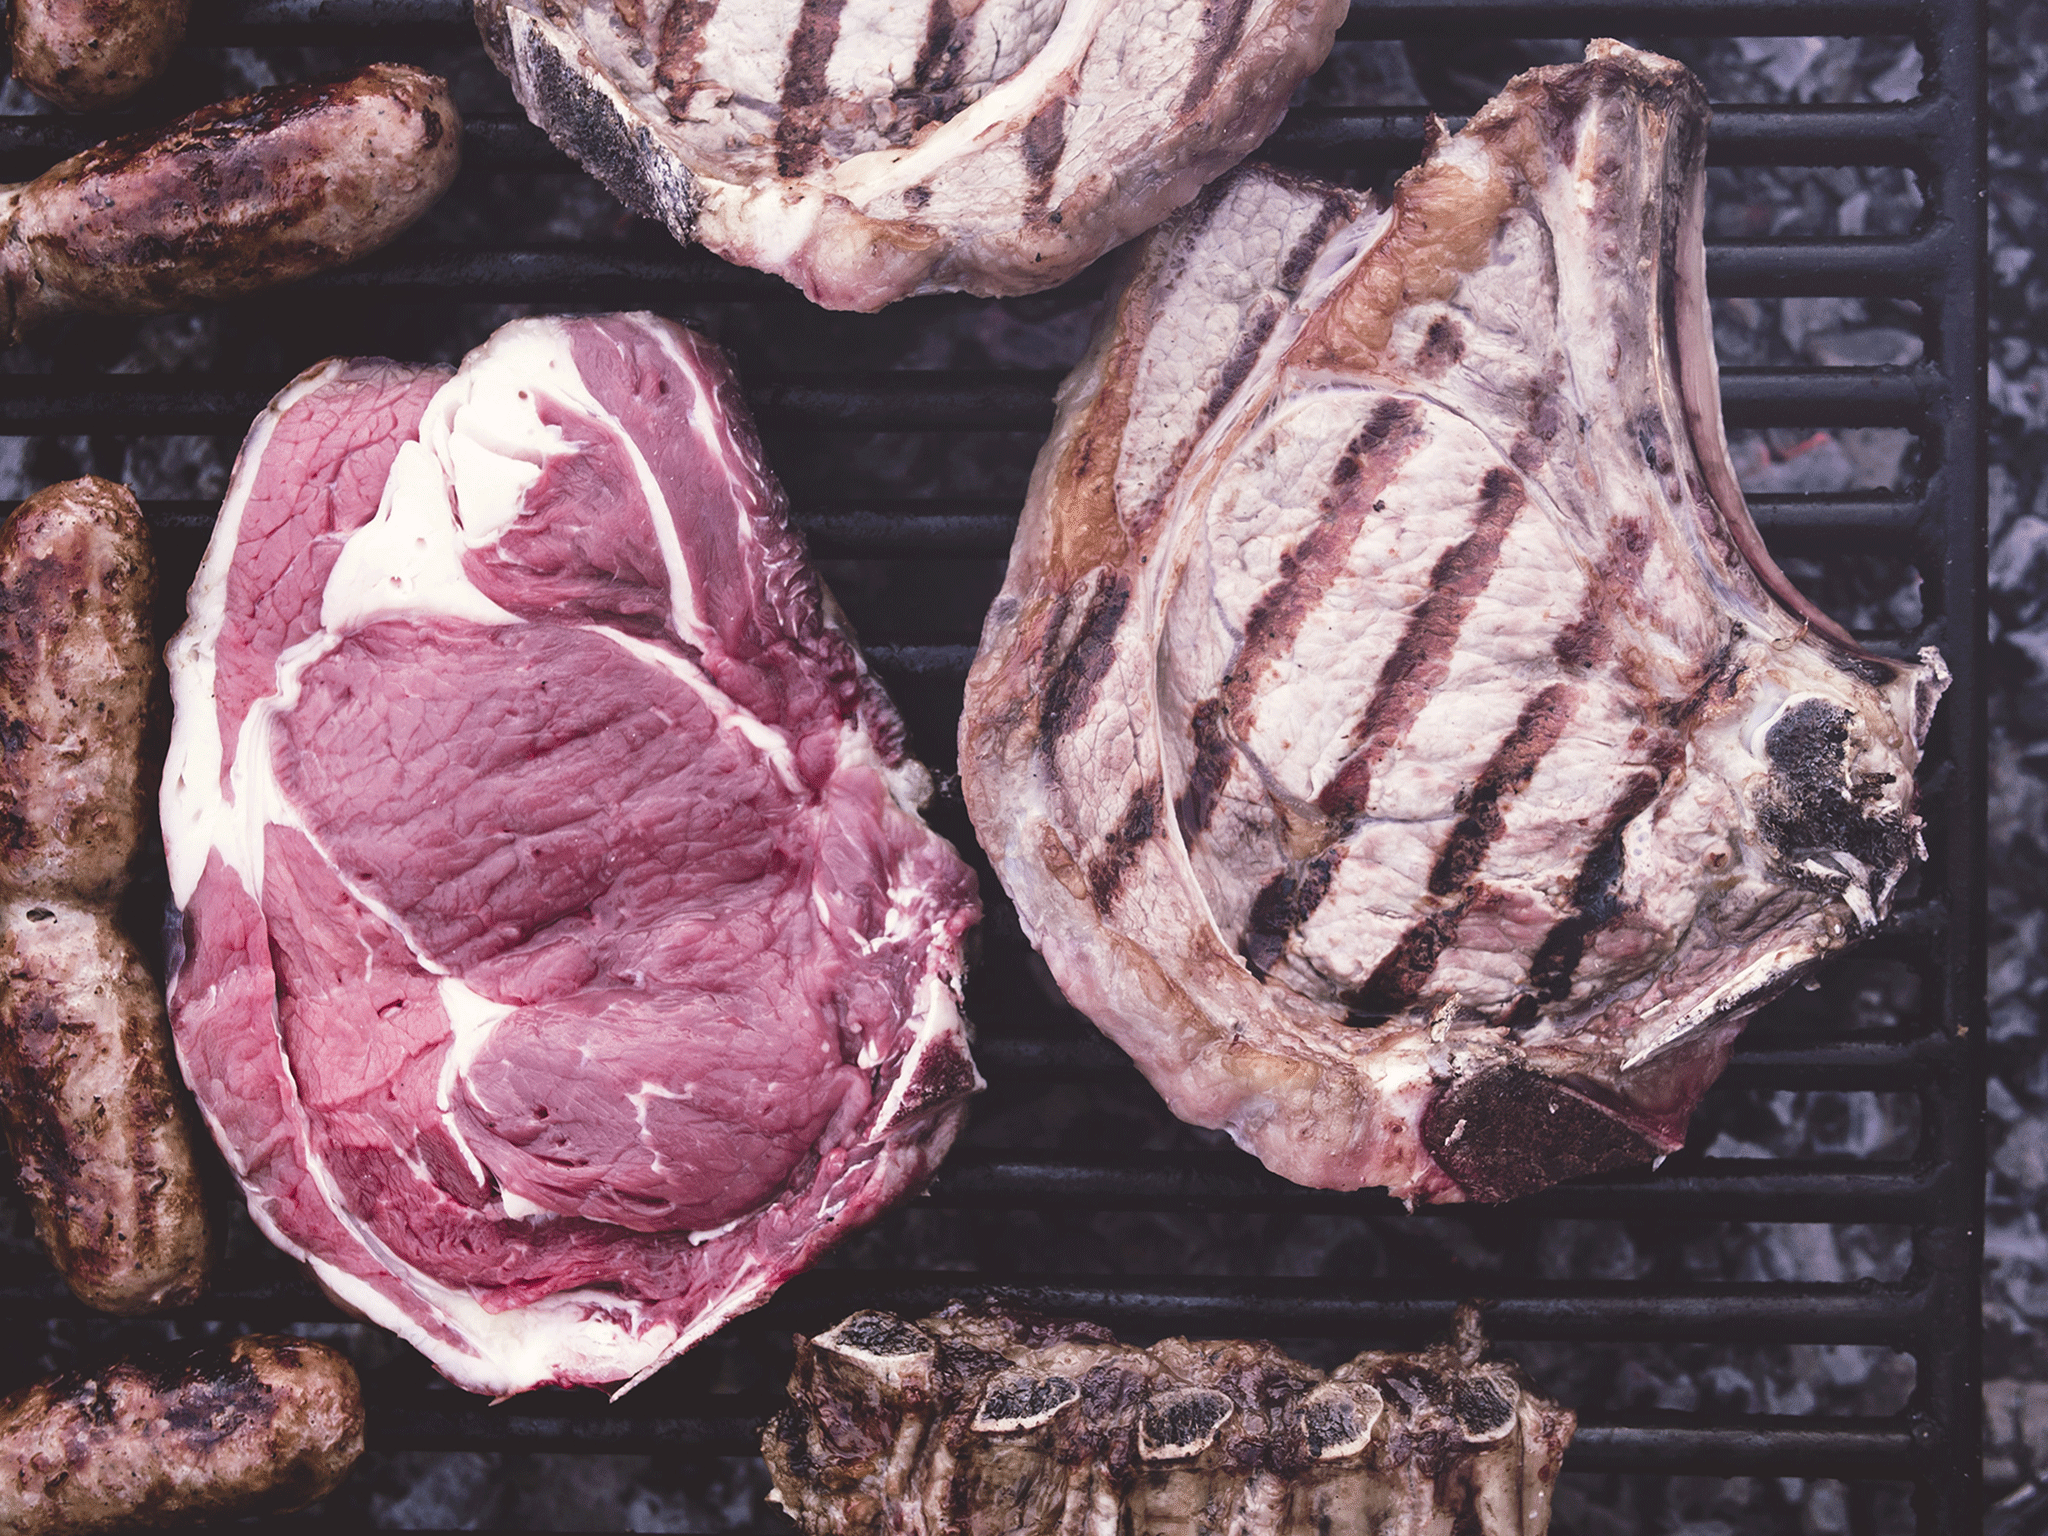 Harmful chemicals may be released by flame-grilling meat, scientists have claimed